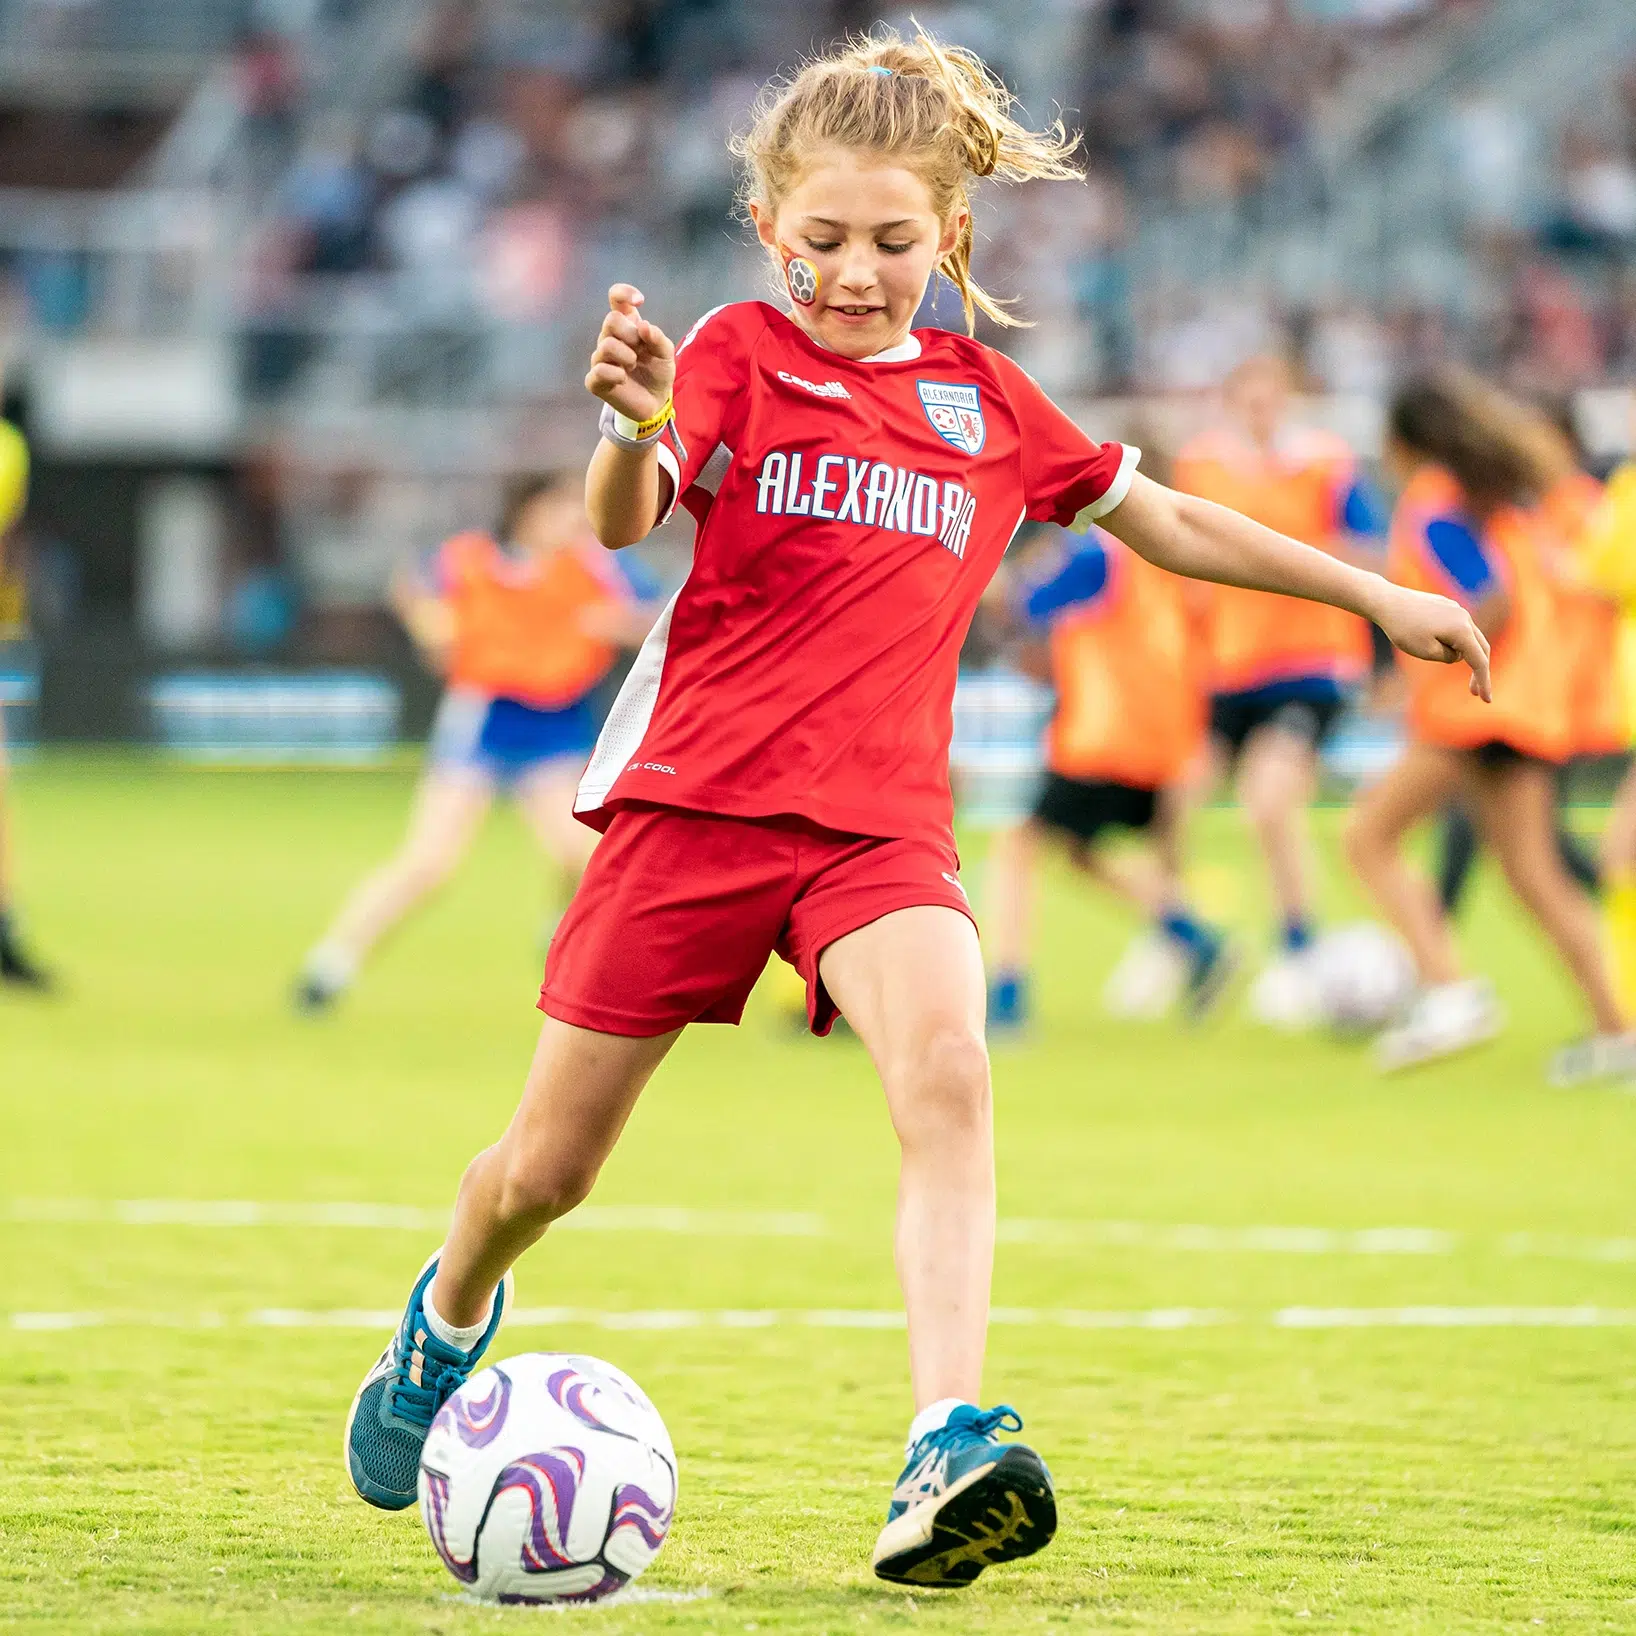 A young girl in a red Alexandria Soccer kit prepares to kick a ball.